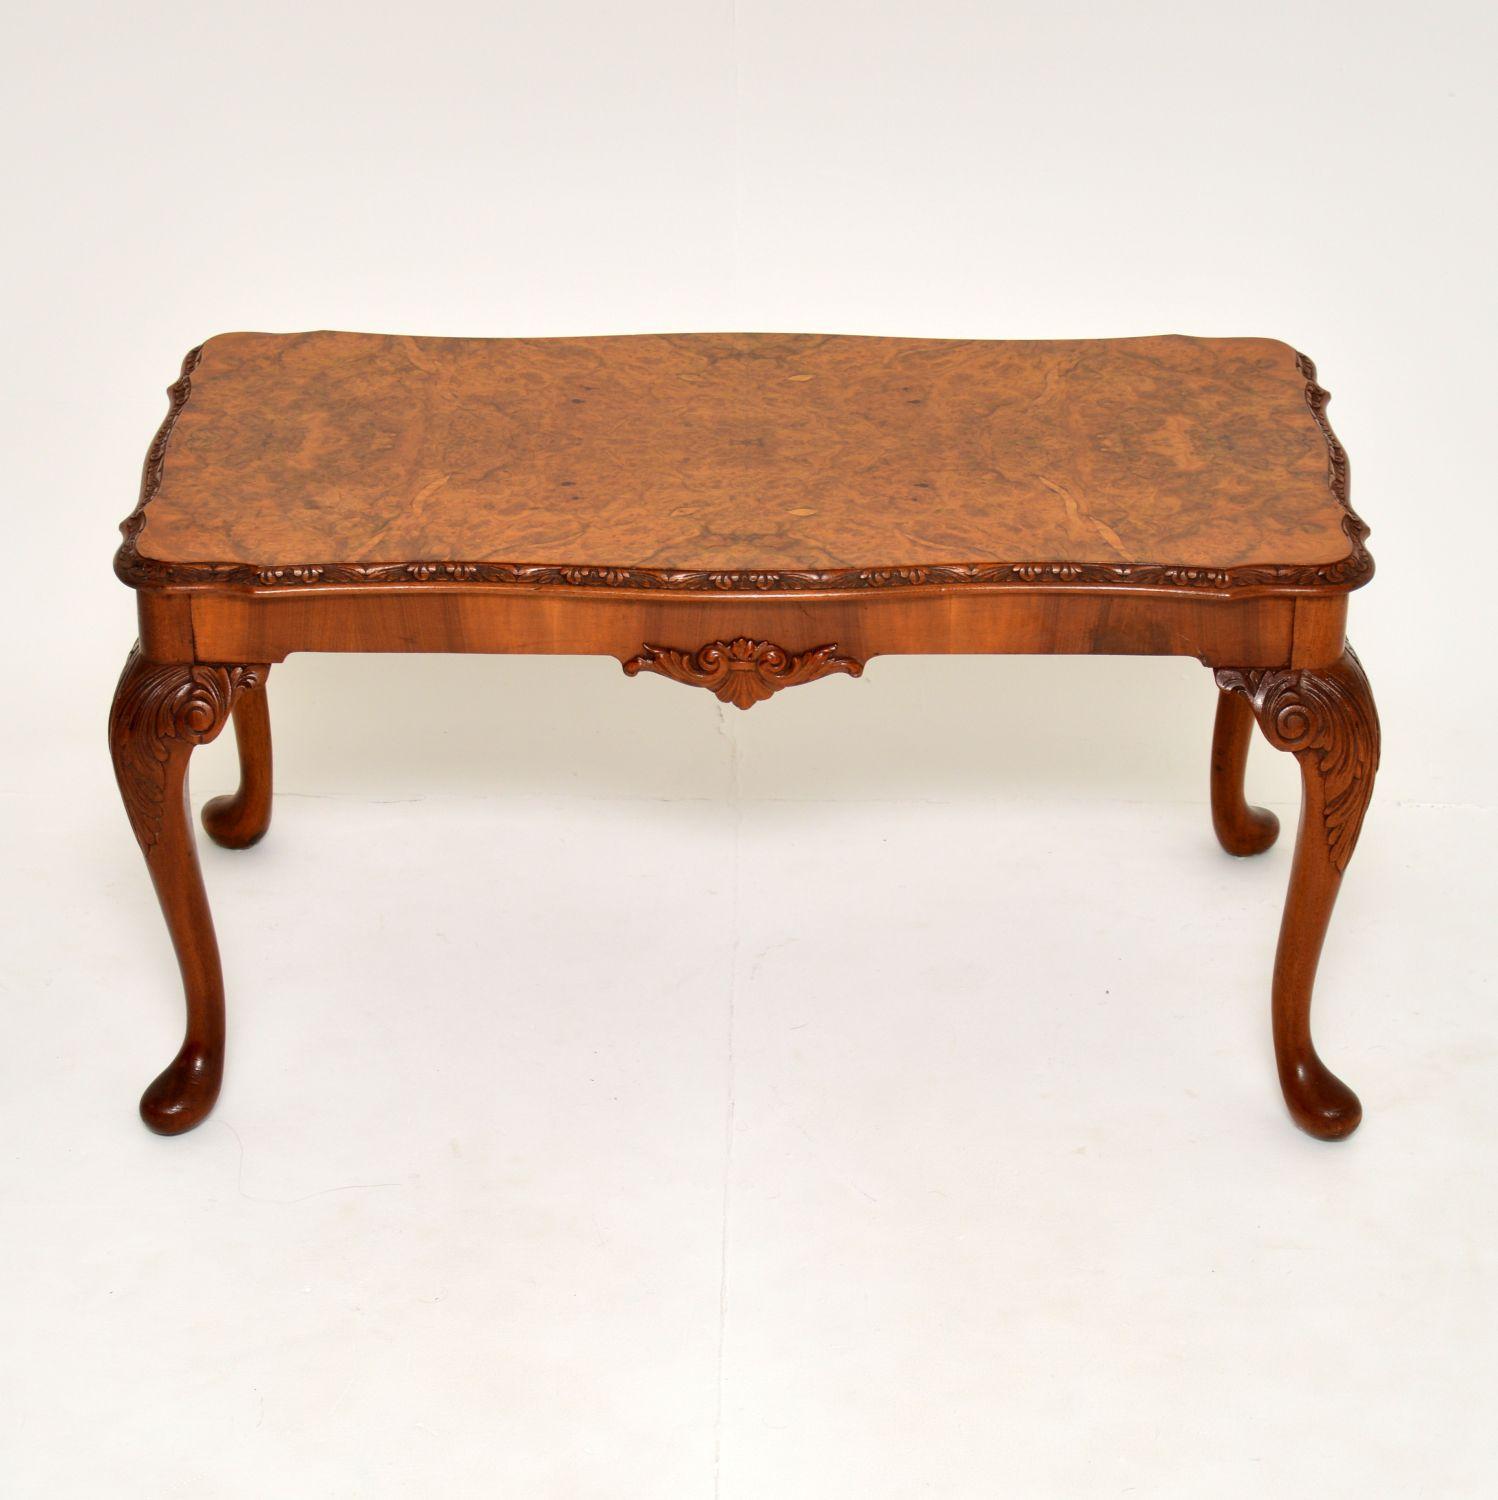 A stunning burr walnut coffee table in the antique Queen Anne style. This was made in England, it dates from the 1930’s.

It is of amazing quality, with a beautiful serpentine shape and stunning burr walnut veneers. There is wonderful crisp